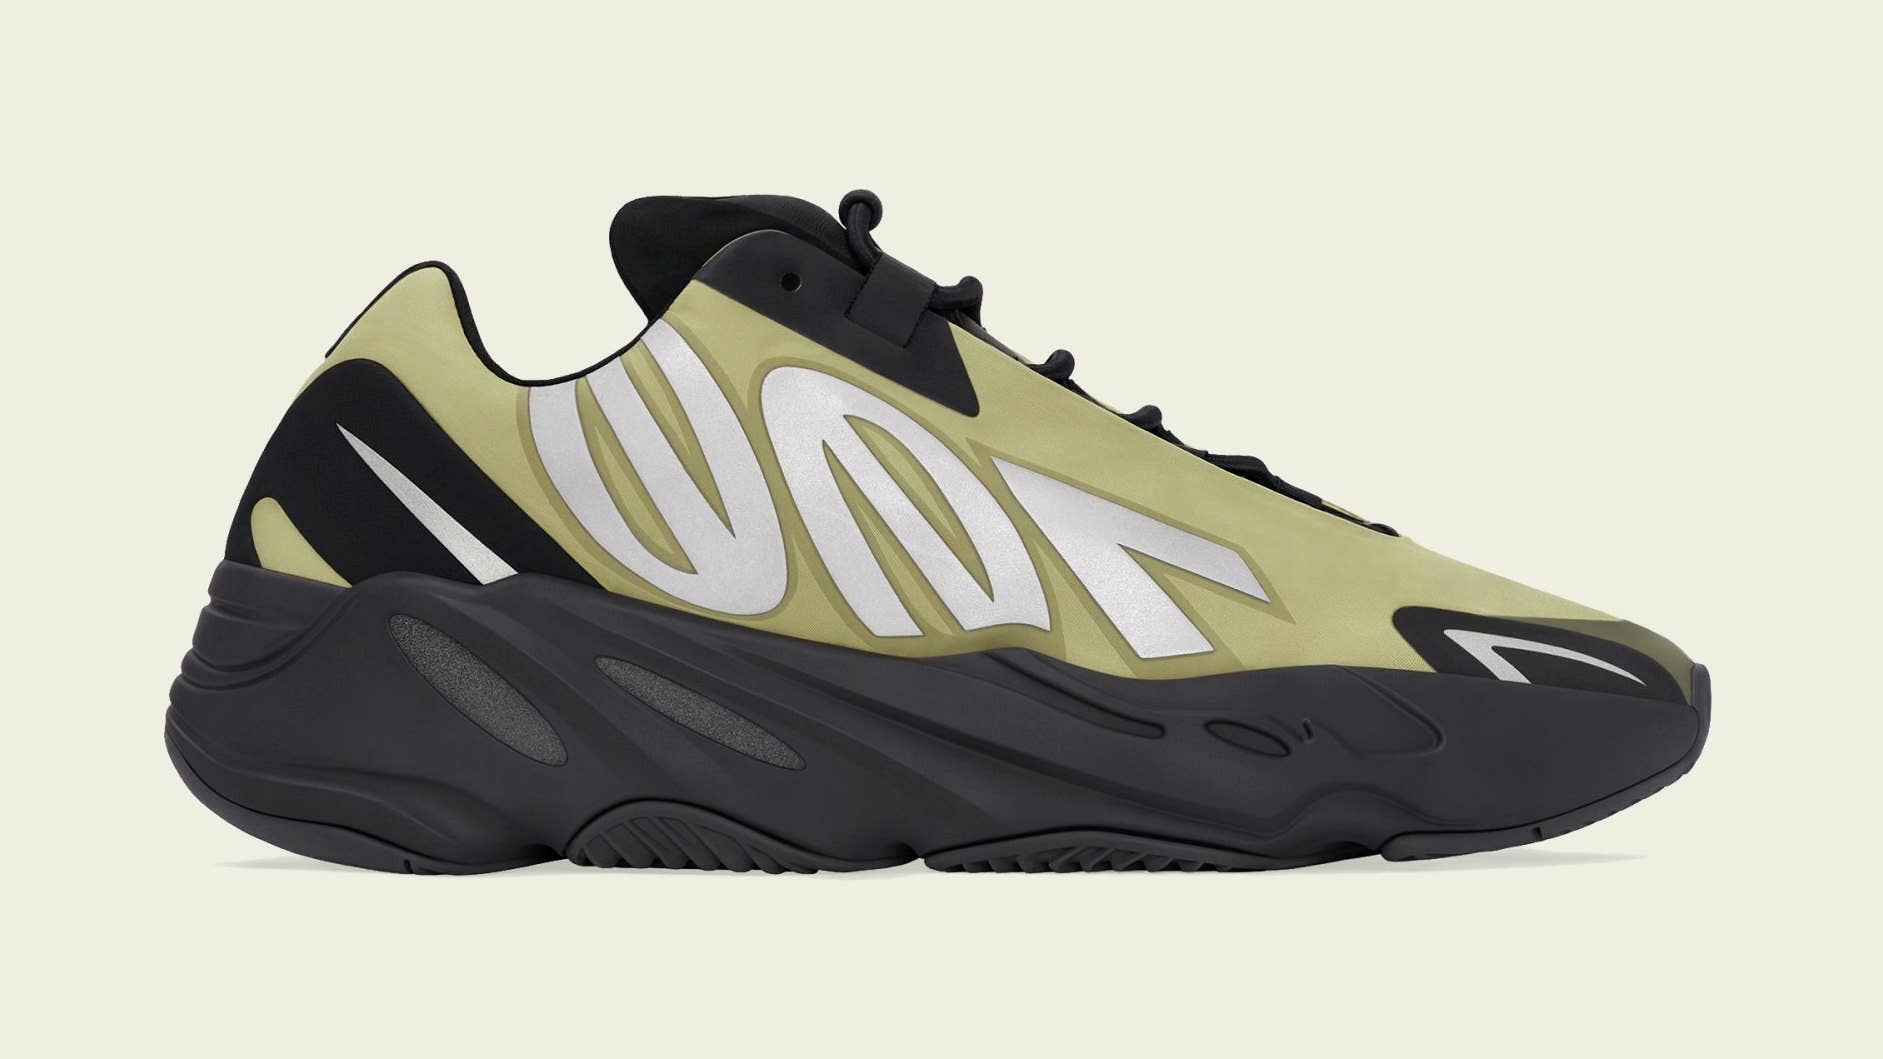 Adidas Yeezy Boost 700 MNVN 'Resin' GW9525 Lateral